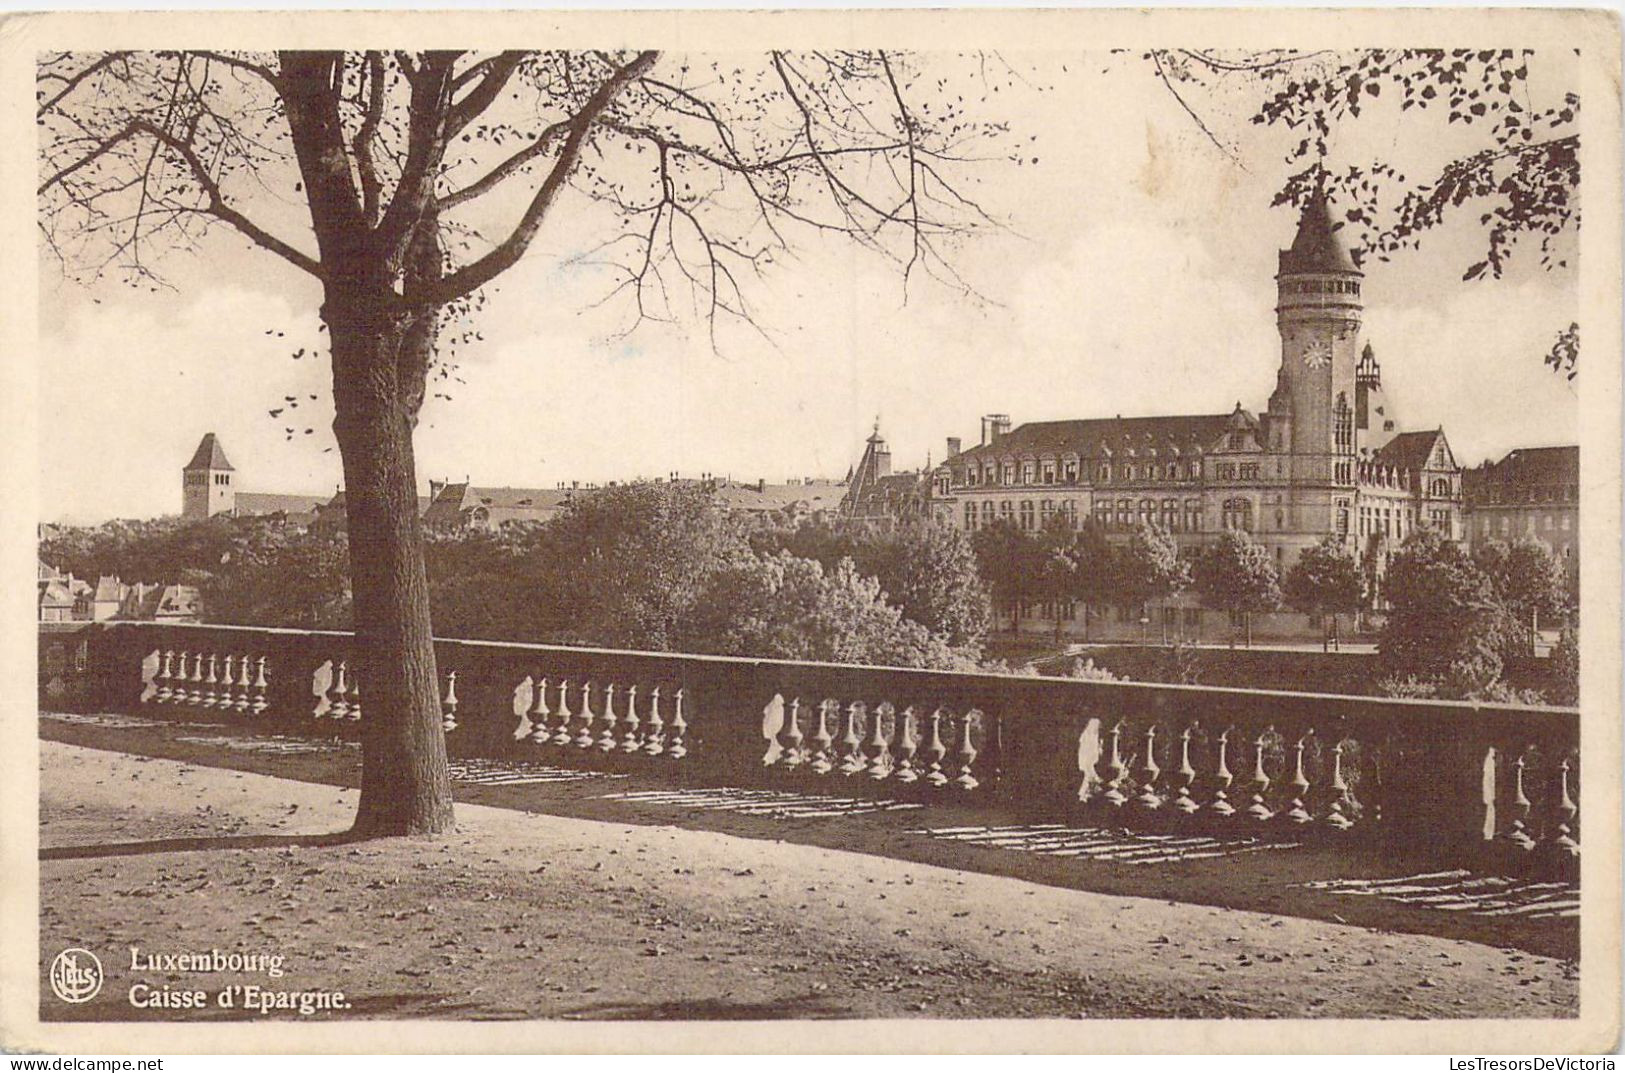 LUXEMBOURG - Caisse D'Epargne - Carte Postale Ancienne - Luxembourg - Ville